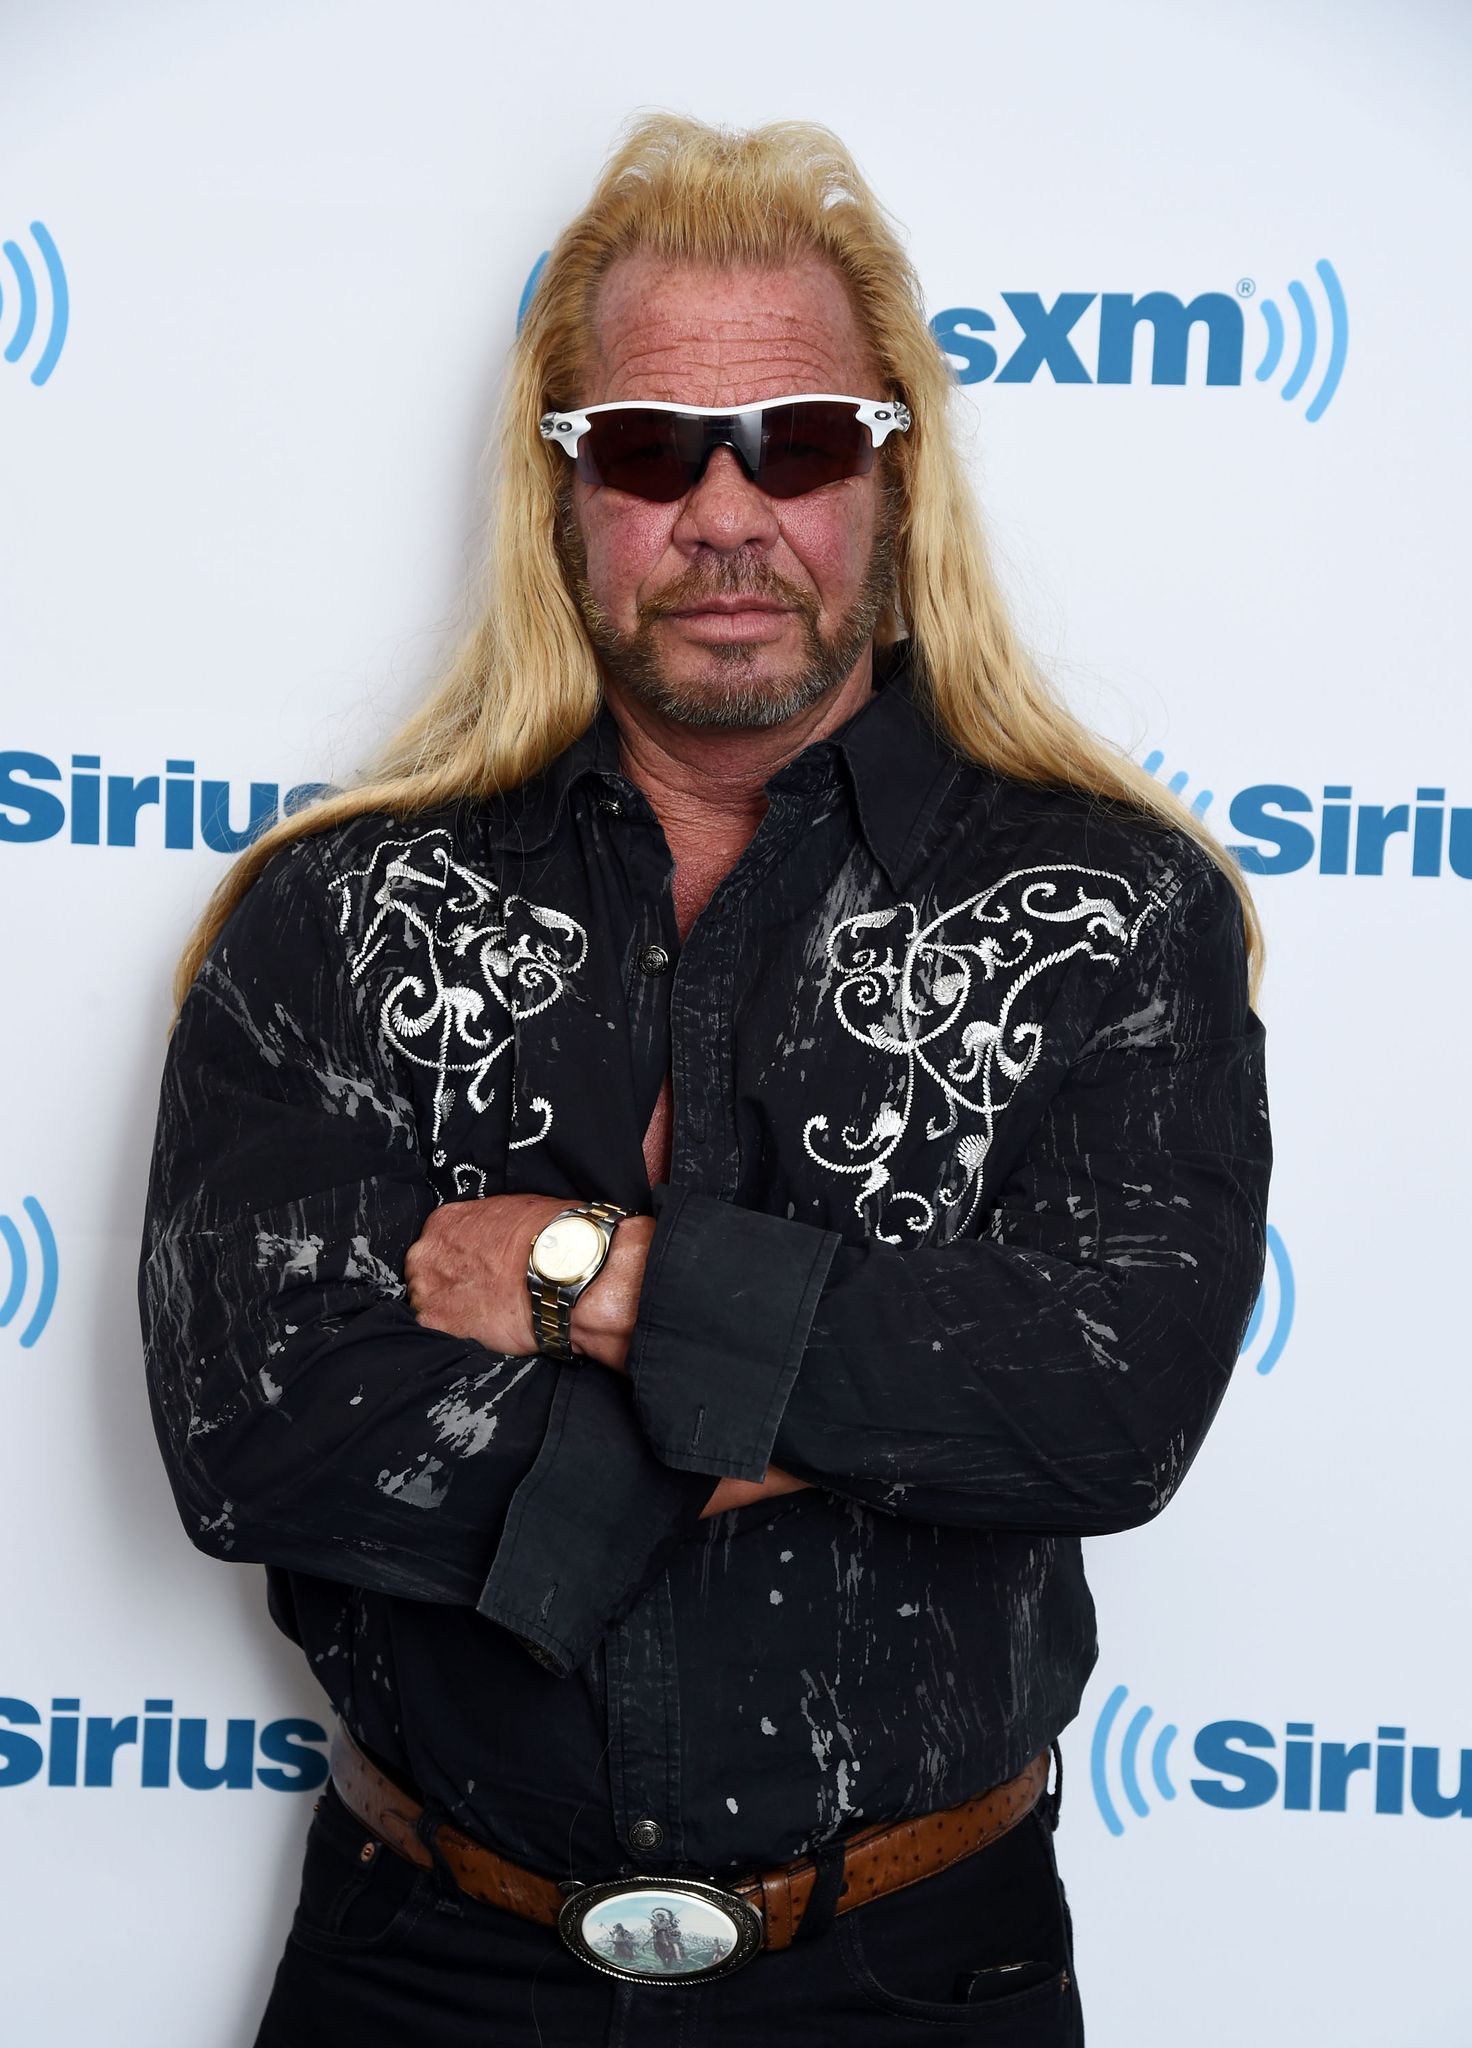 Dog the Bounty Hunter, Duane Chapman visits the SiriusXM Studios on April 24, 2015 in New York City. | Photo: Getty Images